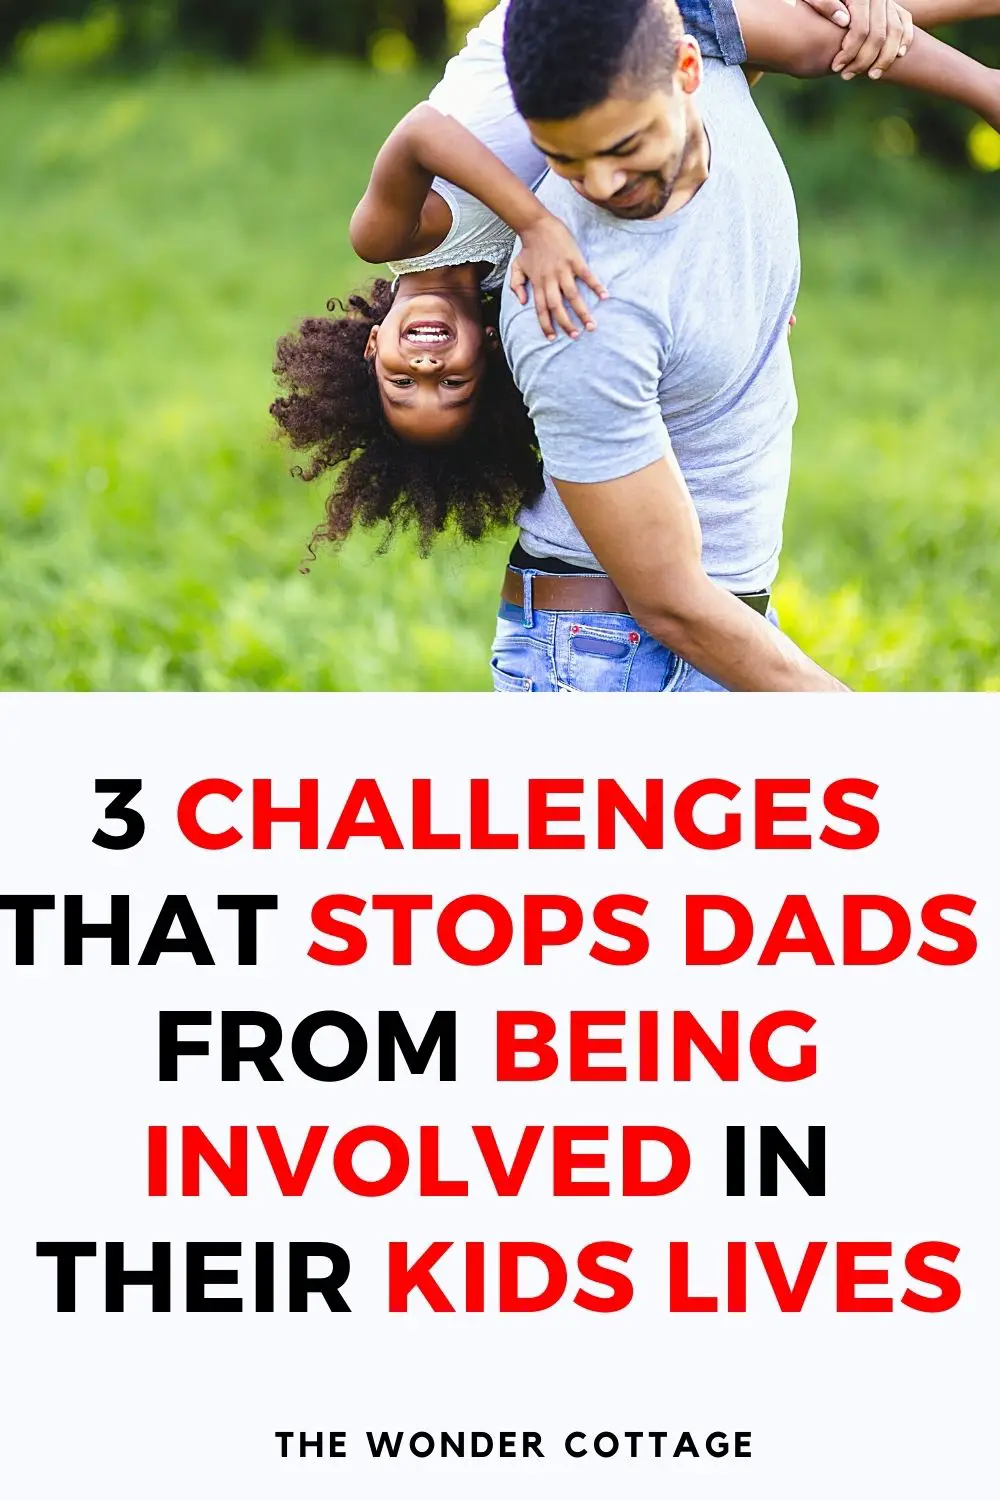 3 challenges that stops dads from being involved in their kids lives